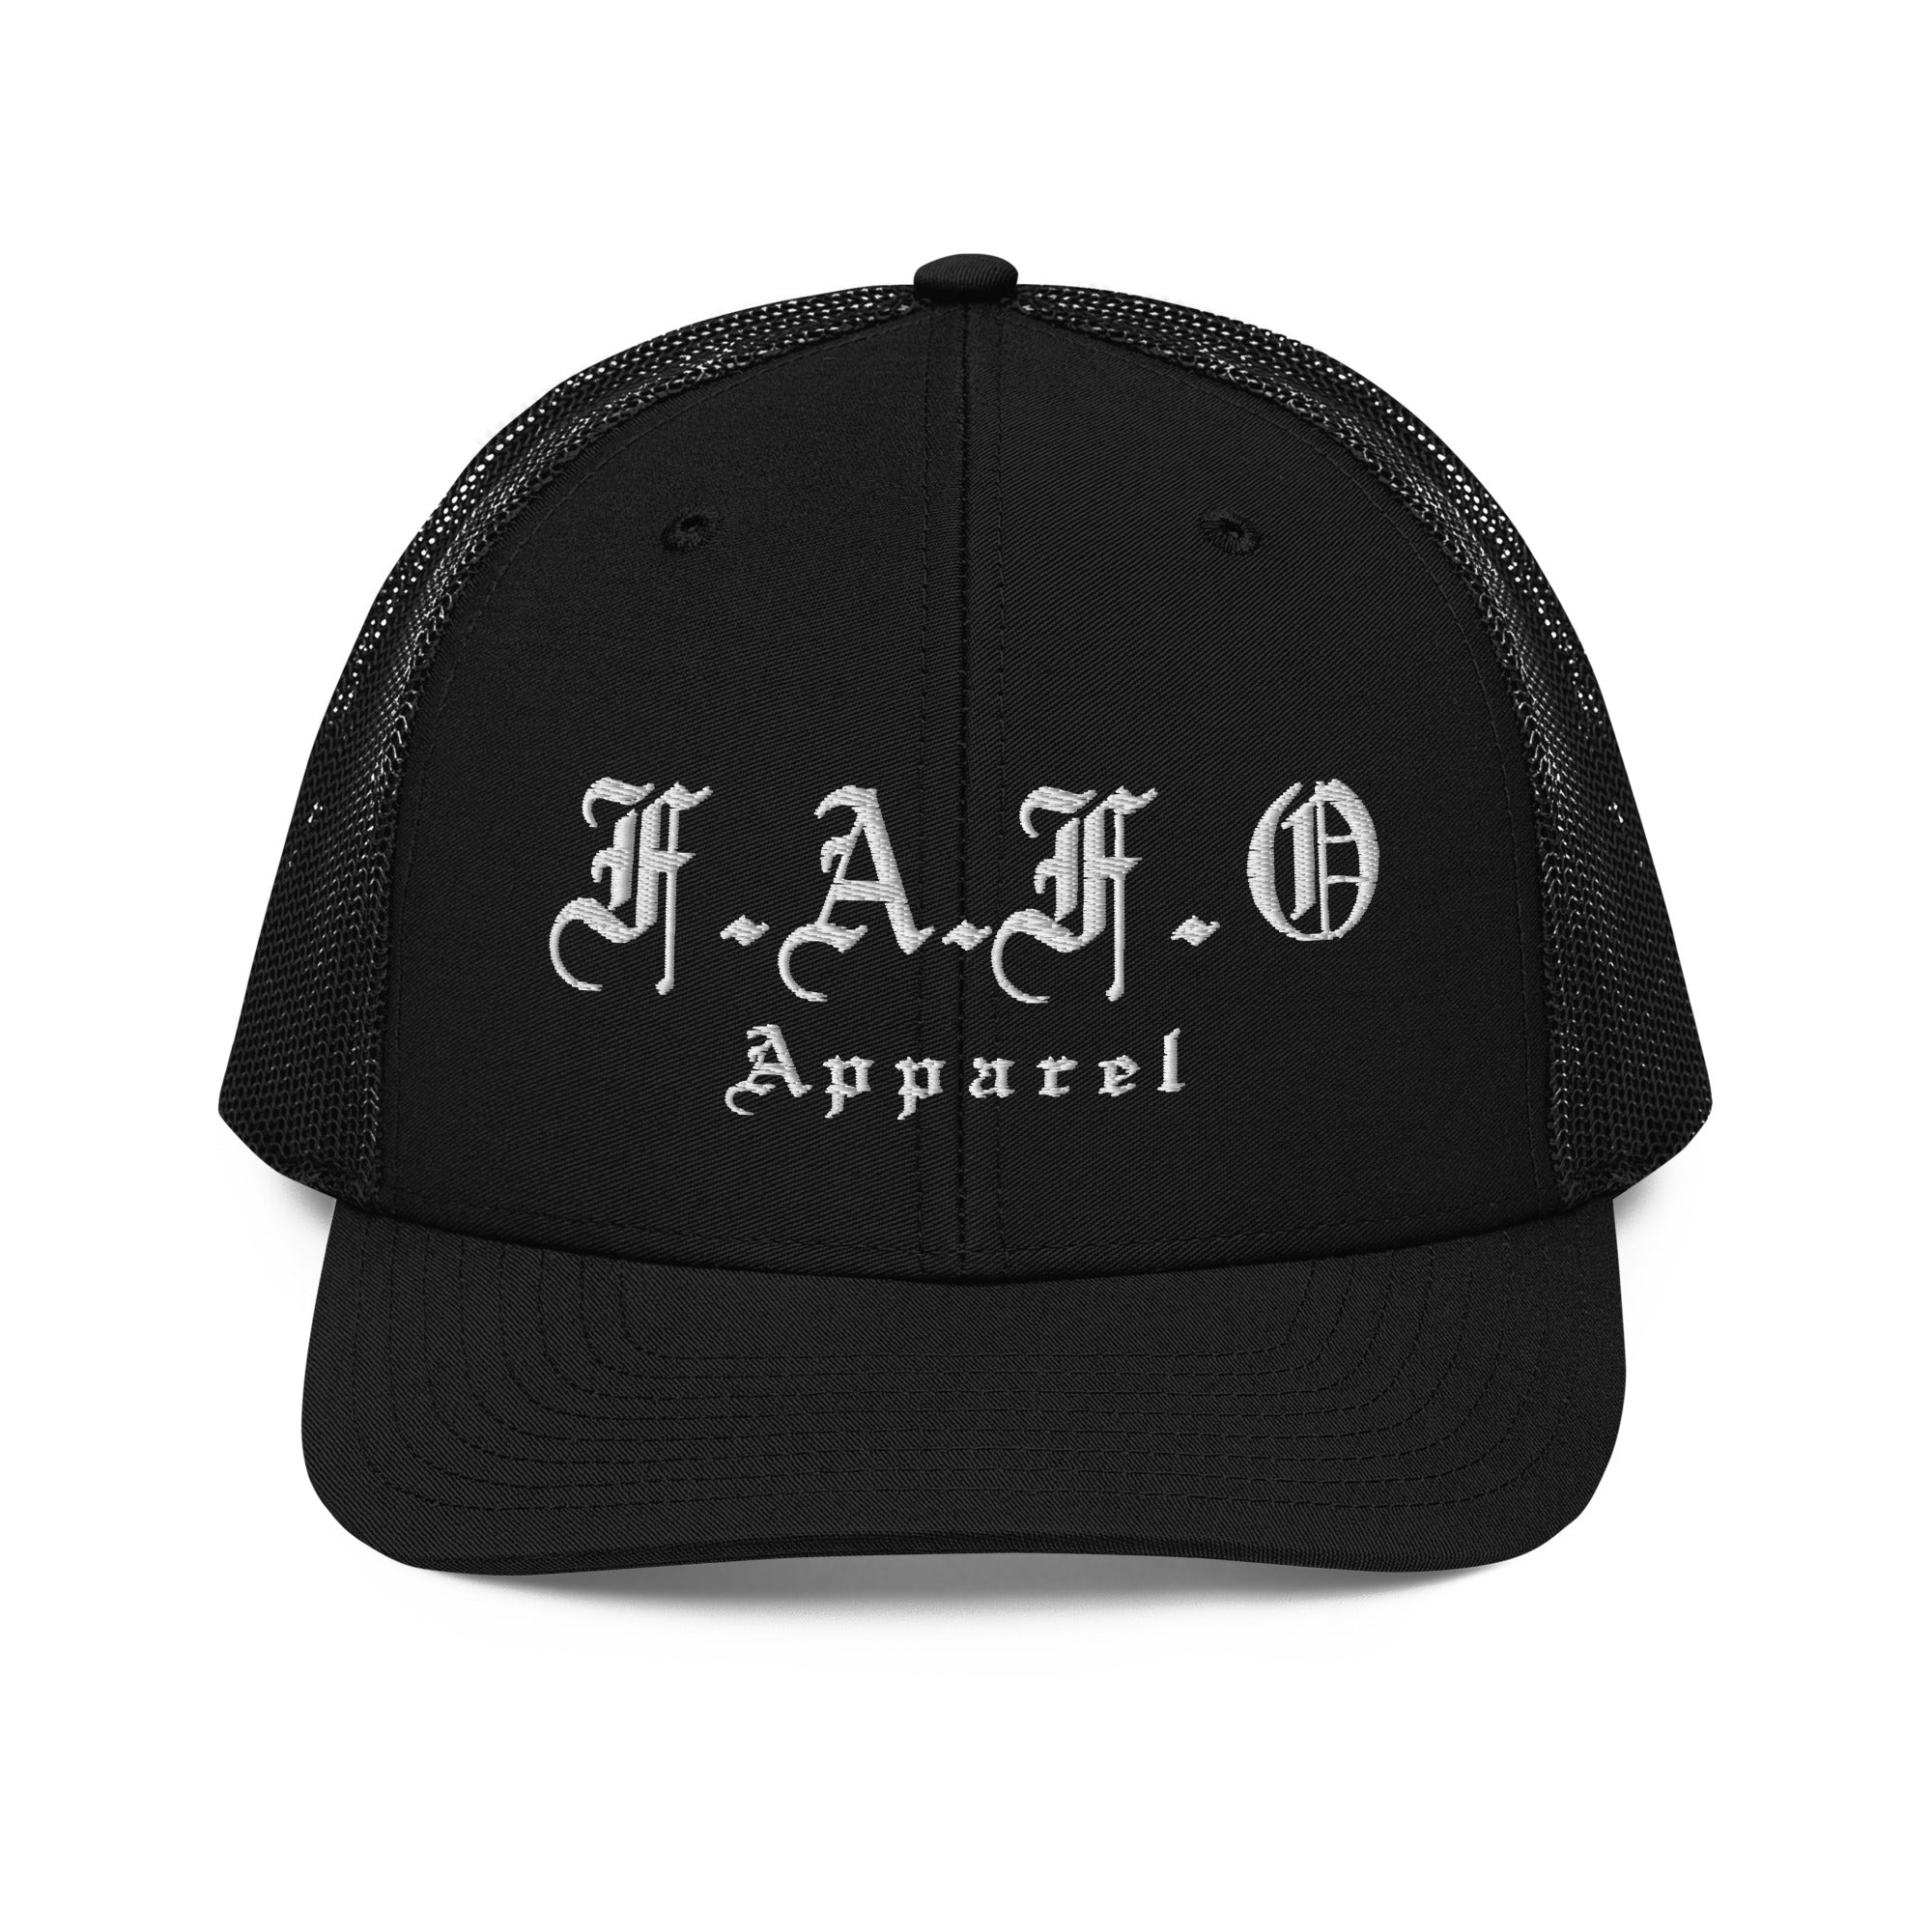 FAFO Patch and American Made Hat Combo